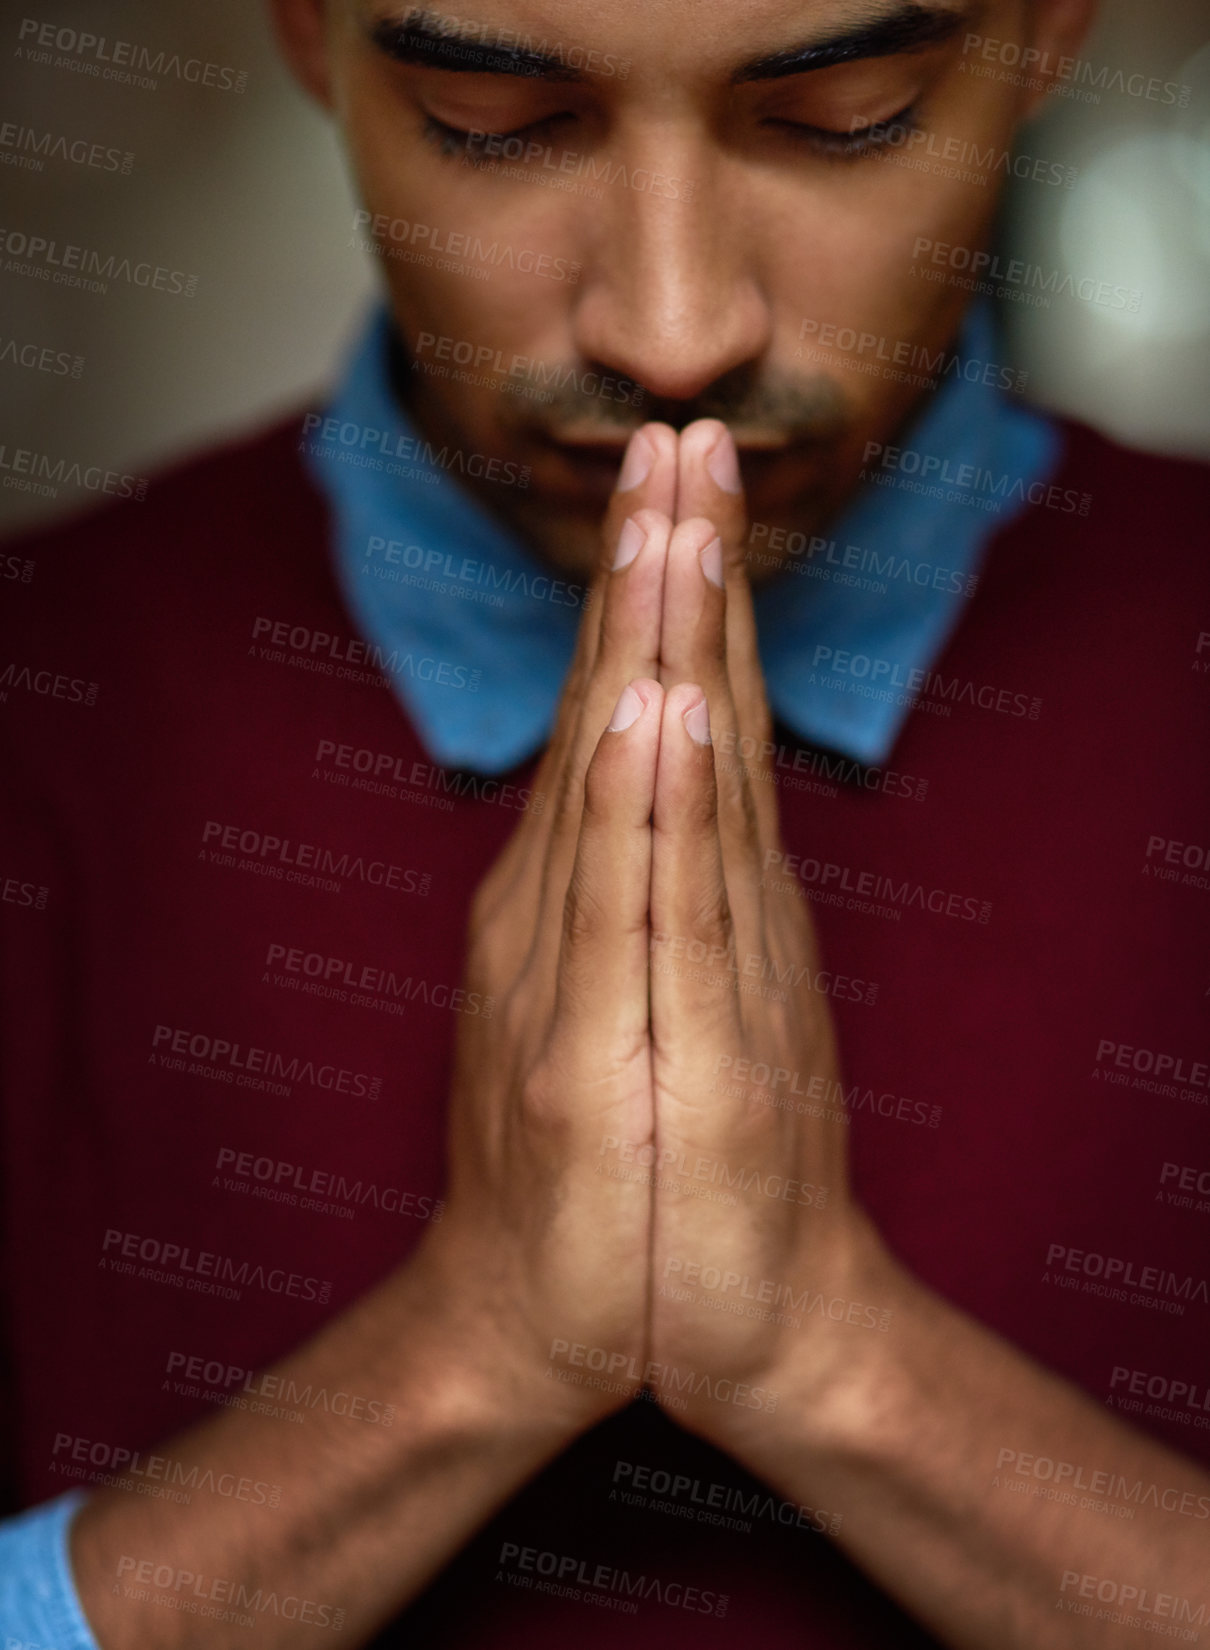 Buy stock photo Cropped shot of a young man holding his hands together in prayer